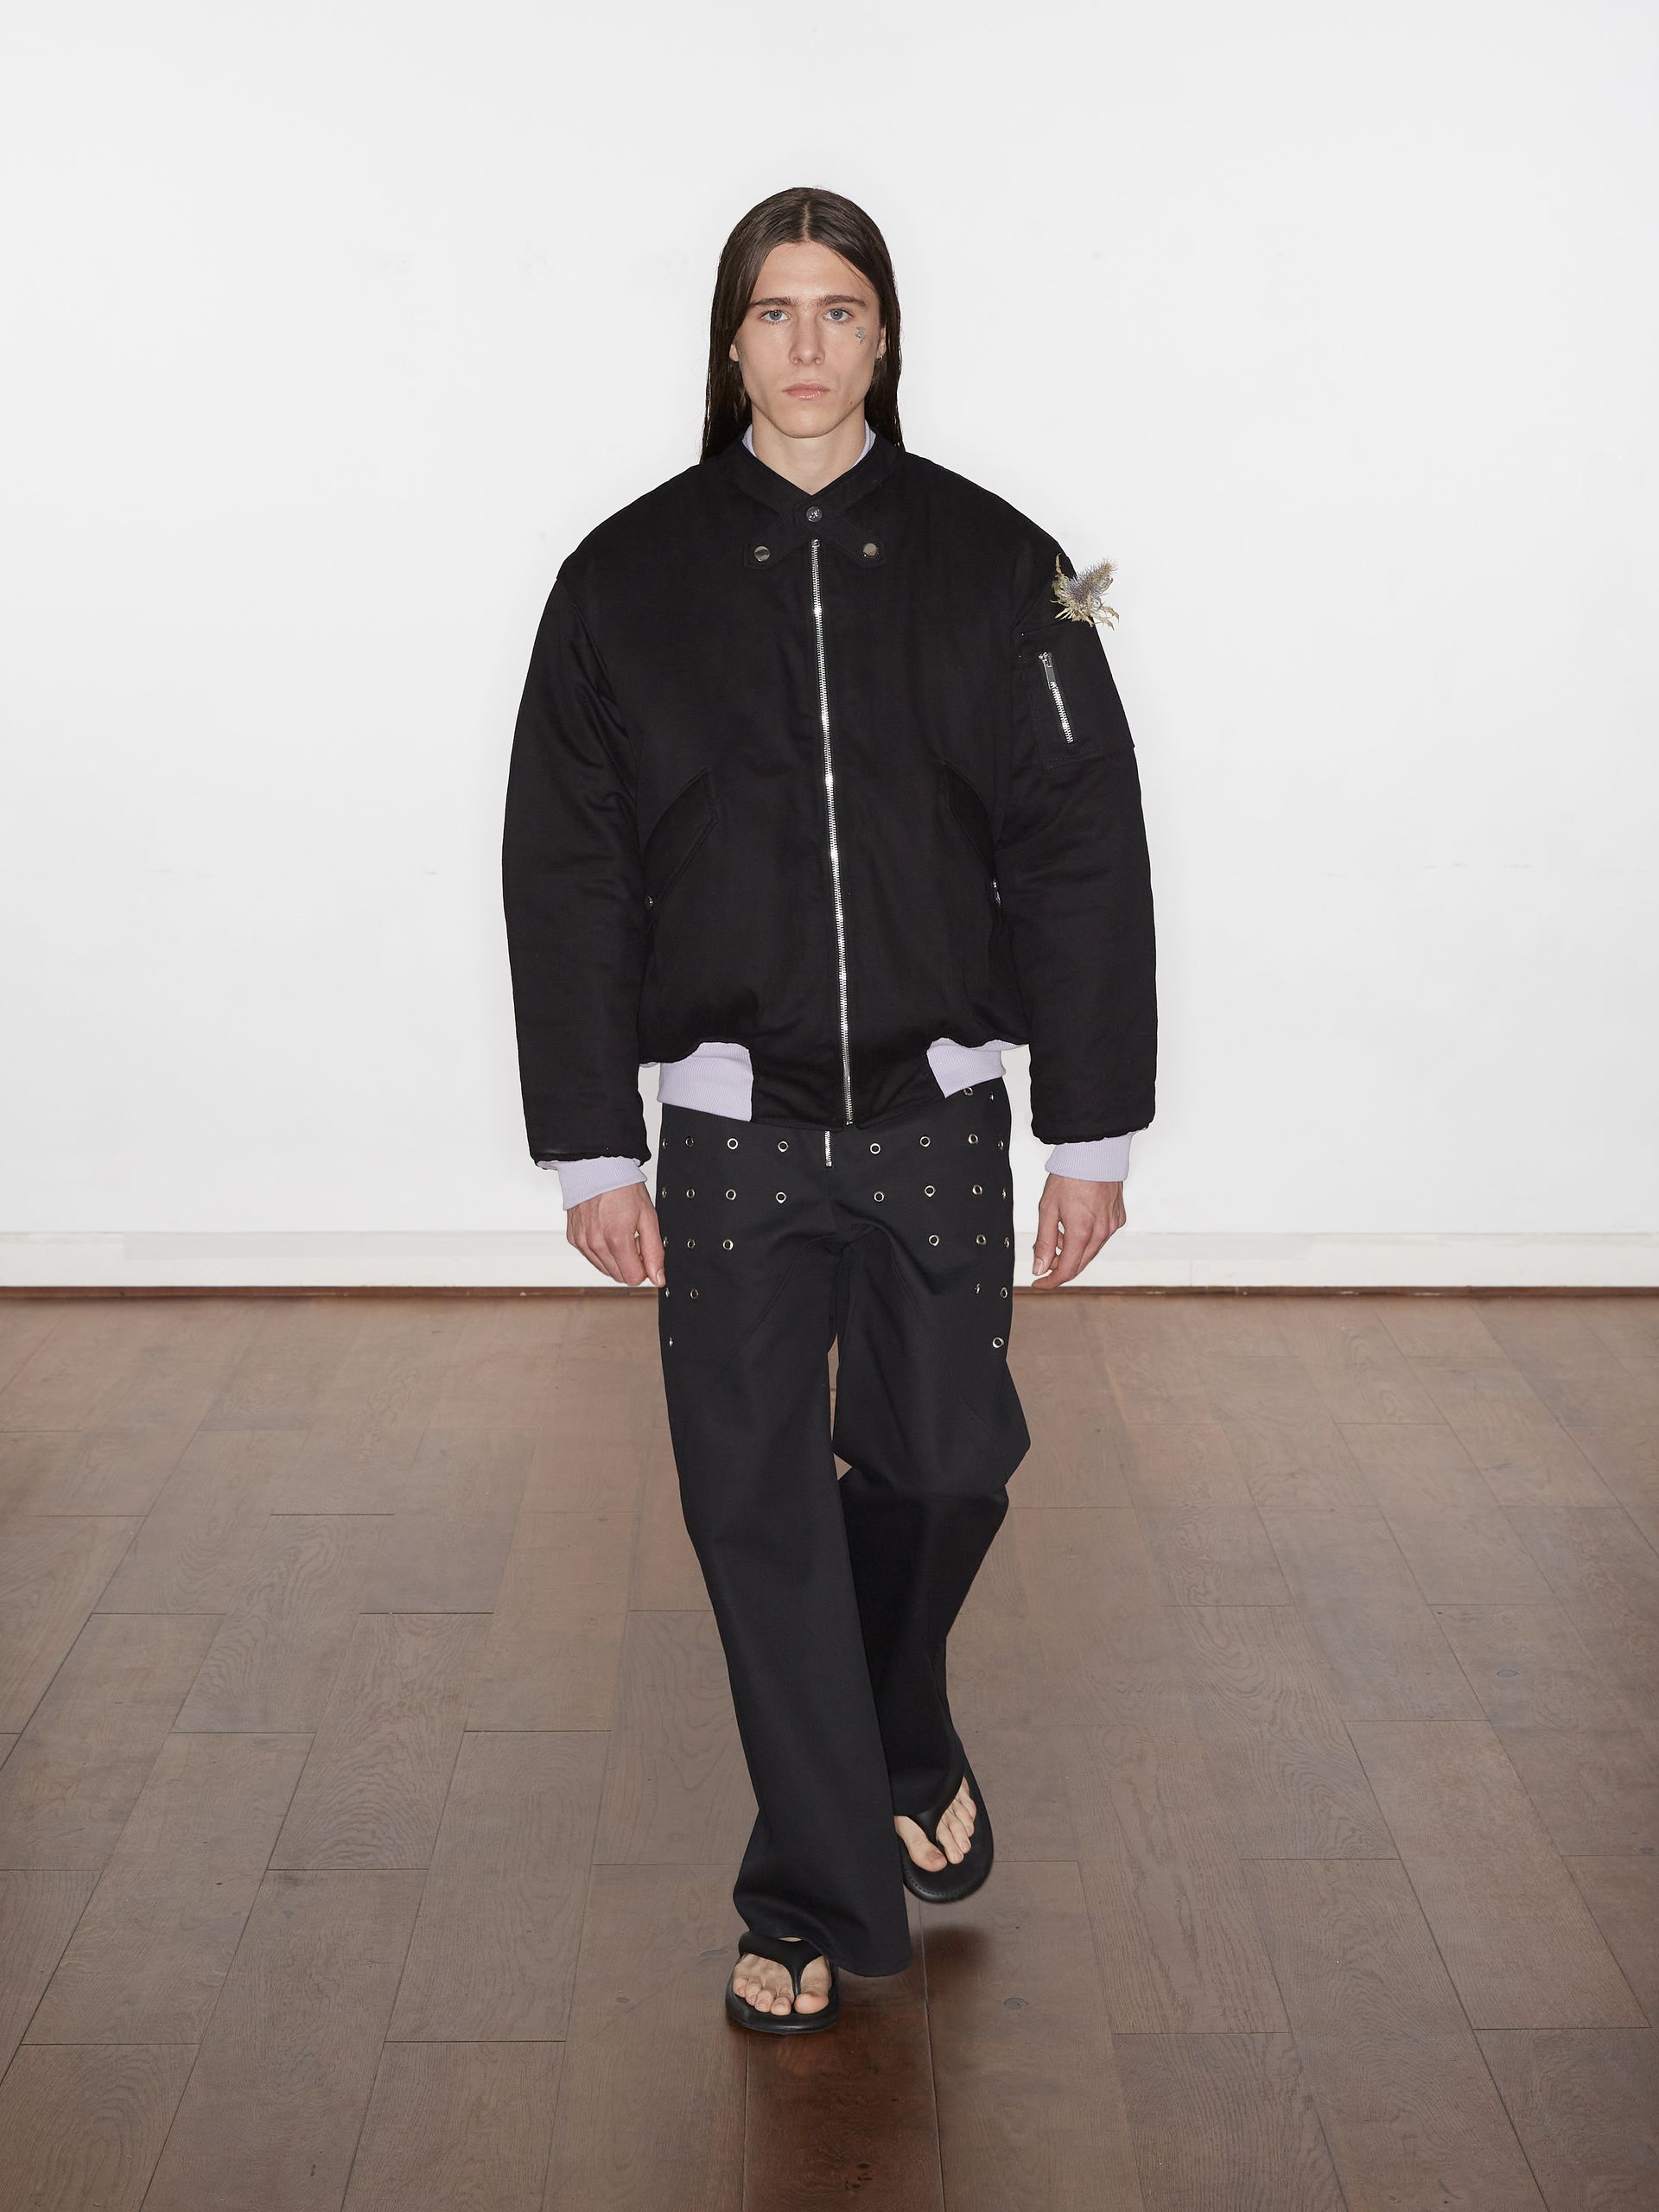 AV Vattev is the London-based menswear brand creating slow fashion with a subcultural twist